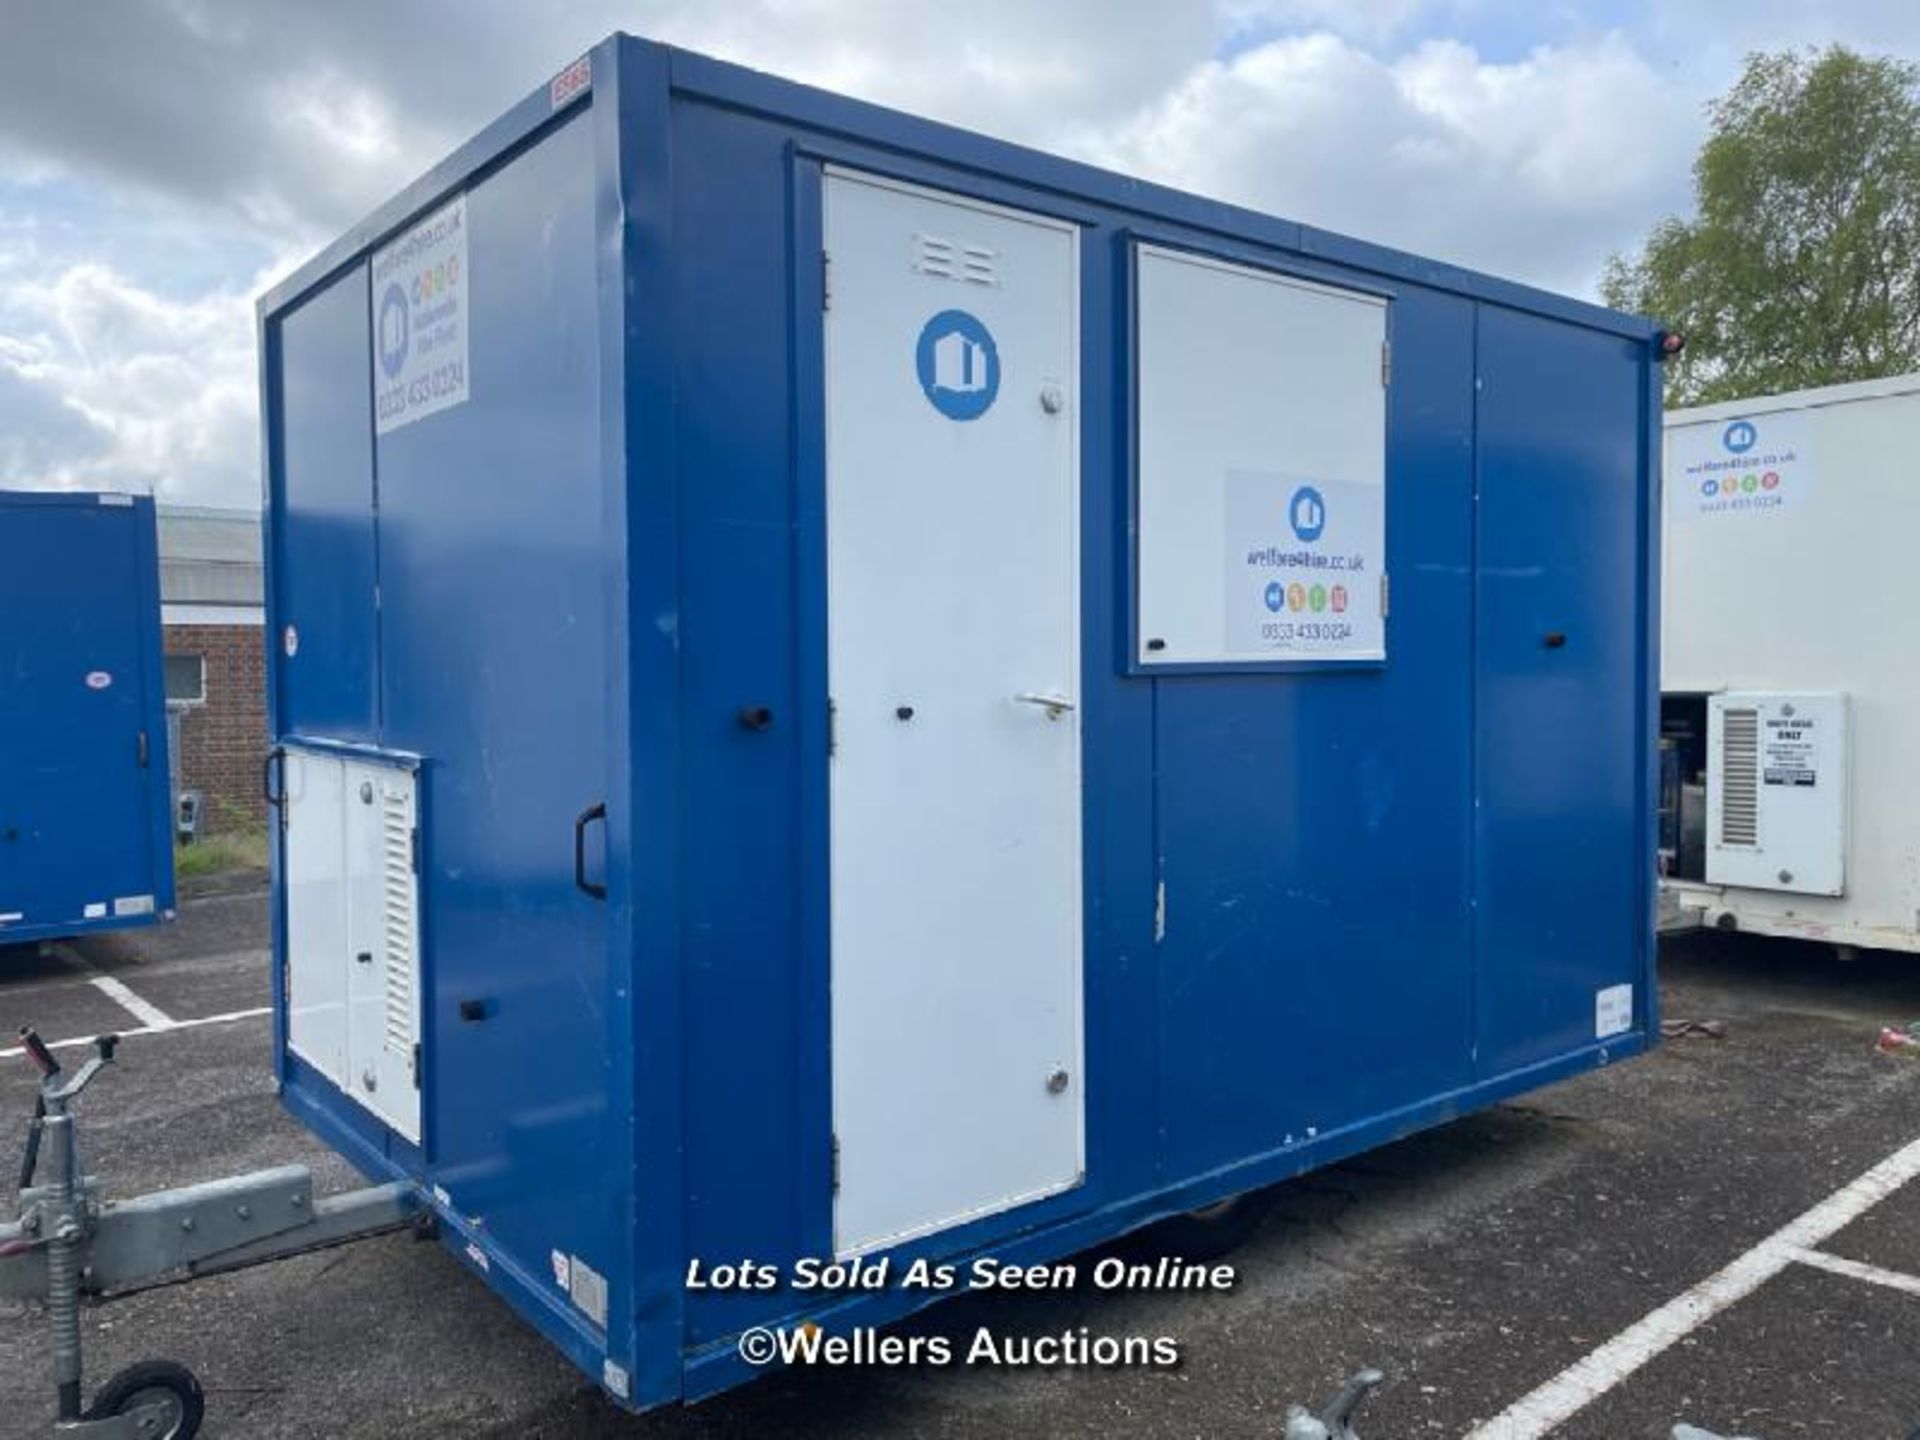 6 PERSON 12 X 7.5FT AJC EASY CABIN TOWABLE WELFARE UNIT, INCLUDES WASH BASIN, KETTLE, MICROWAVE, - Image 4 of 19